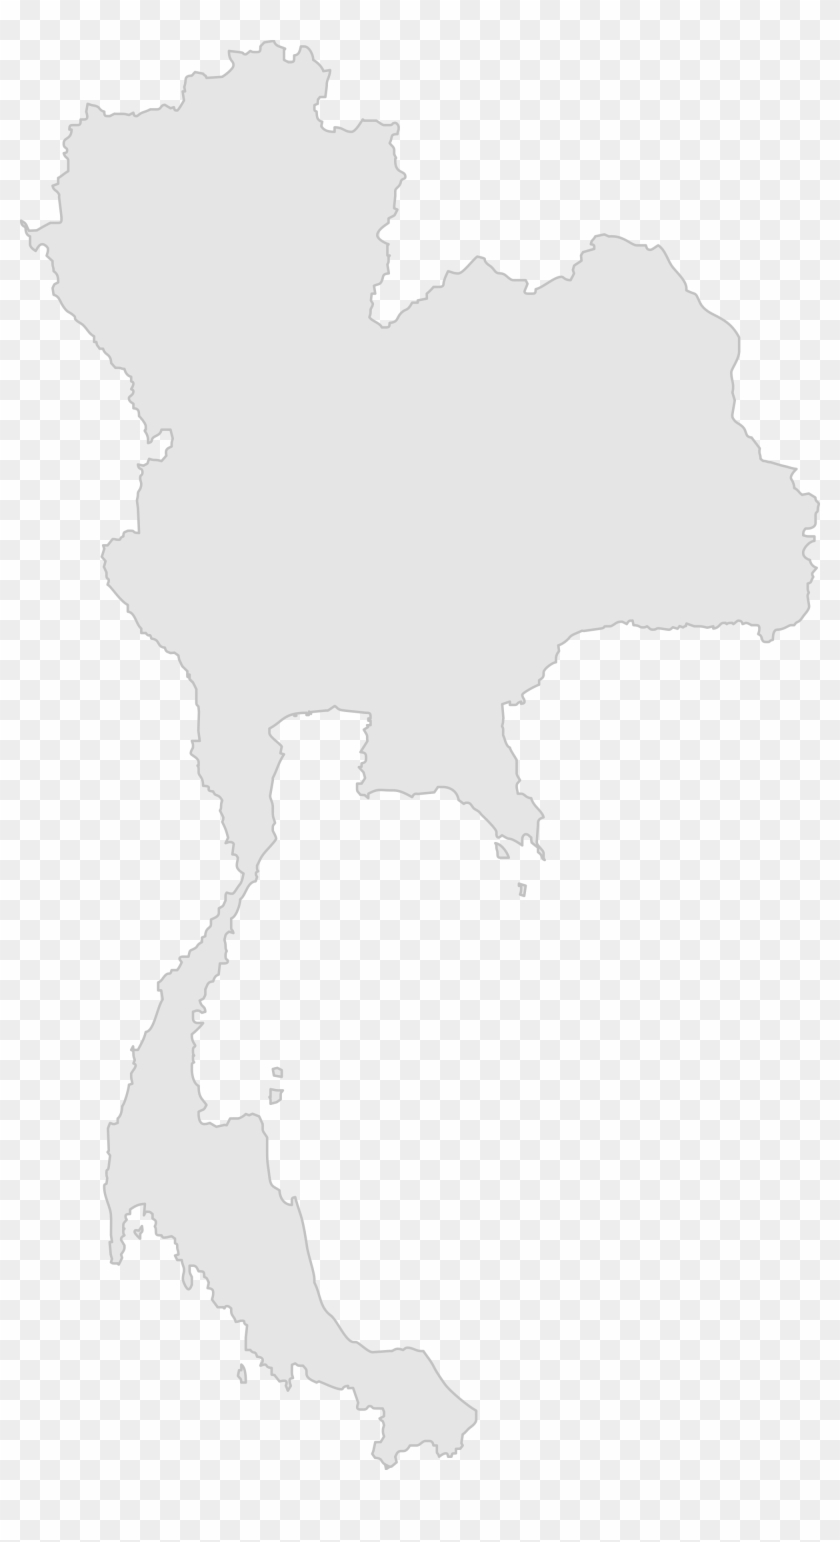 The Emoji Movie Png - Thailand Map Outline Png Clipart #1999516